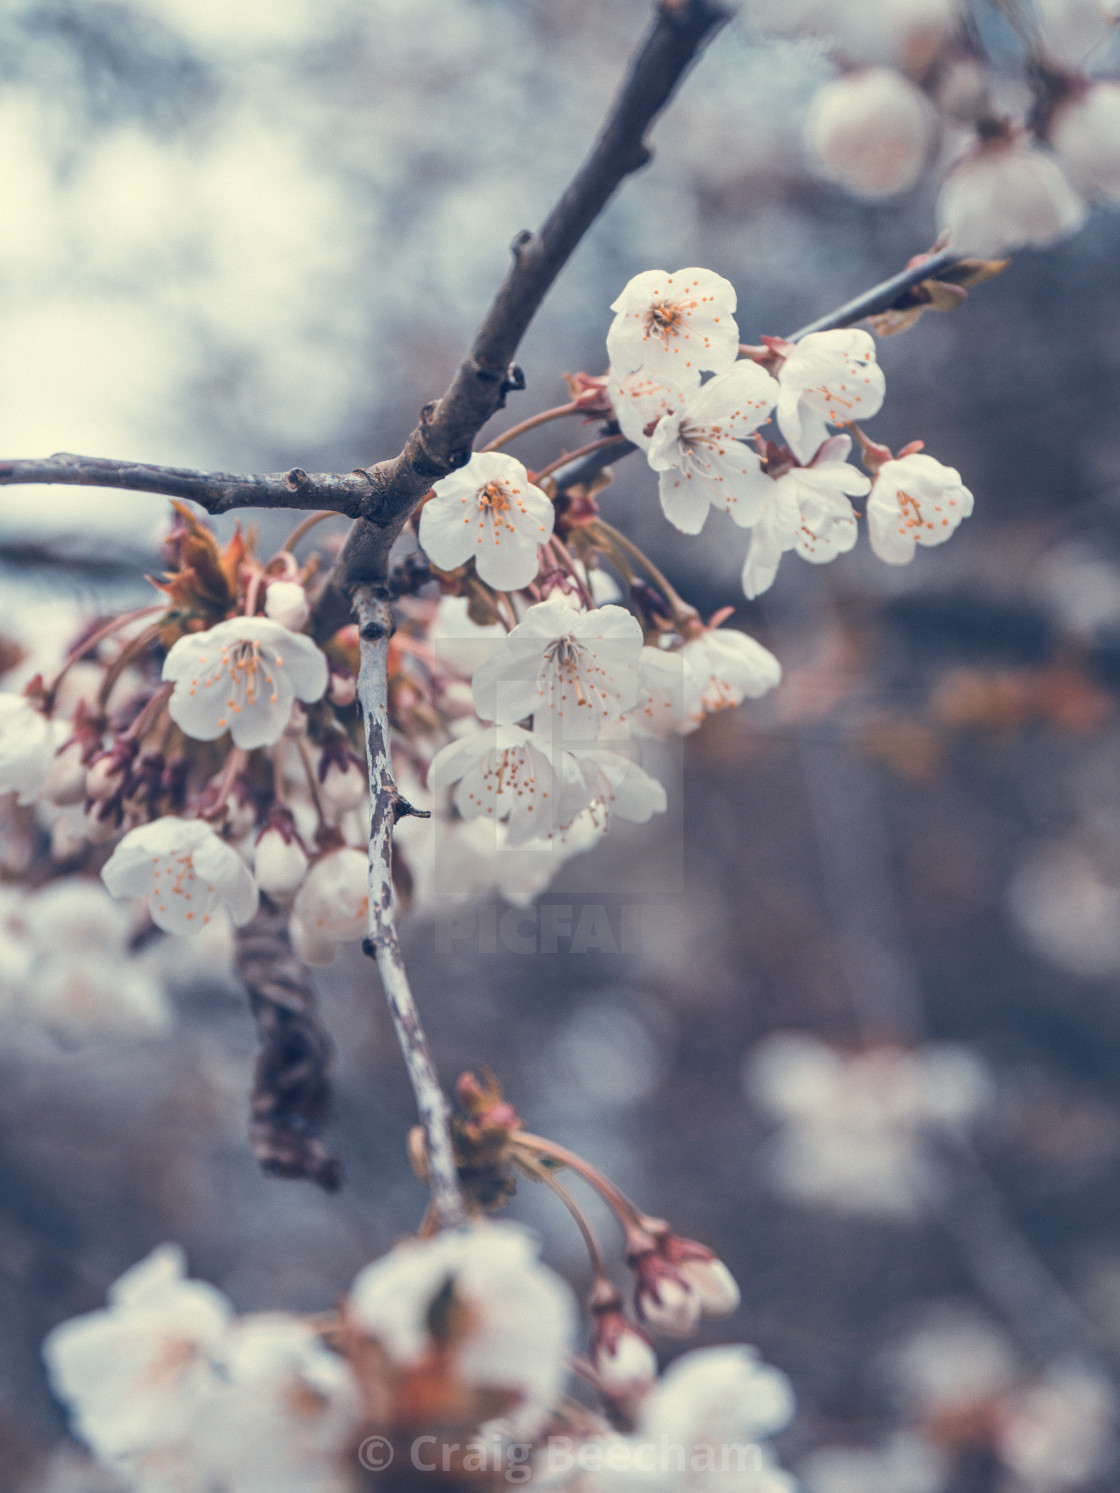 "Blossoming tree" stock image